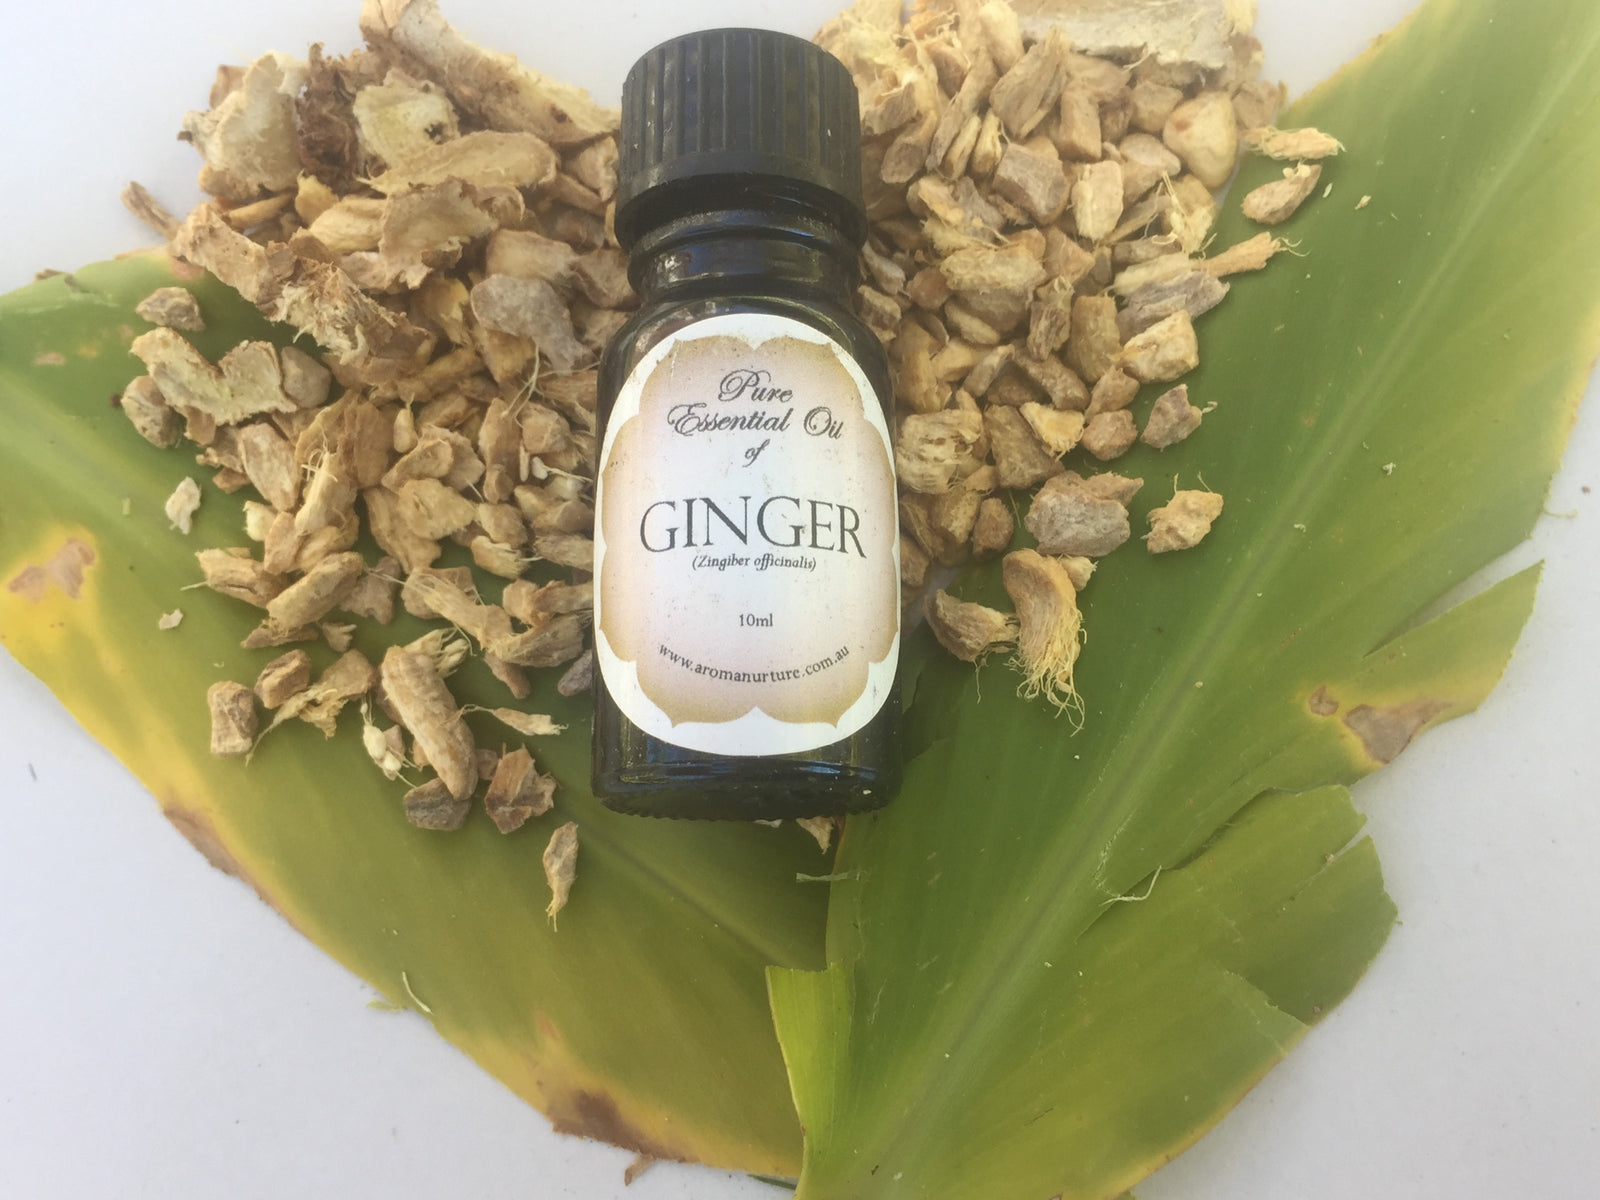 Pure essential oil of Ginger 10mls. (Zingiber officinale).